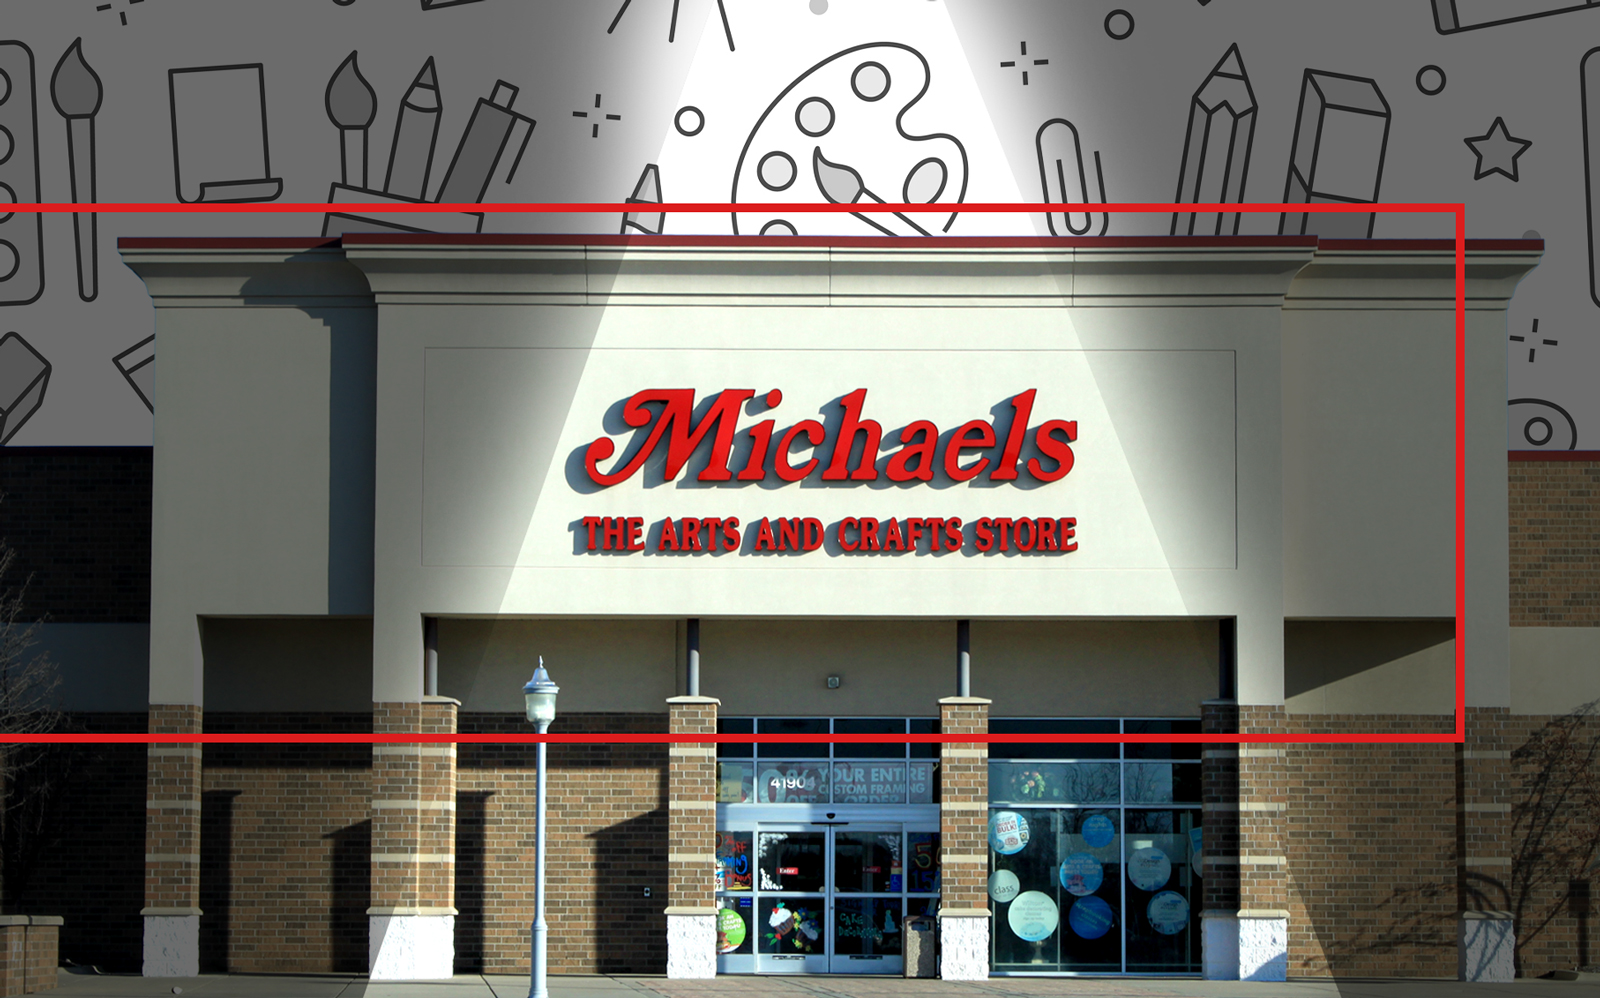 Apollo Global Management will take over craft retailer Michaels in a deal that values the company at $3.3 billion. (Wikipedia Commons, iStock)